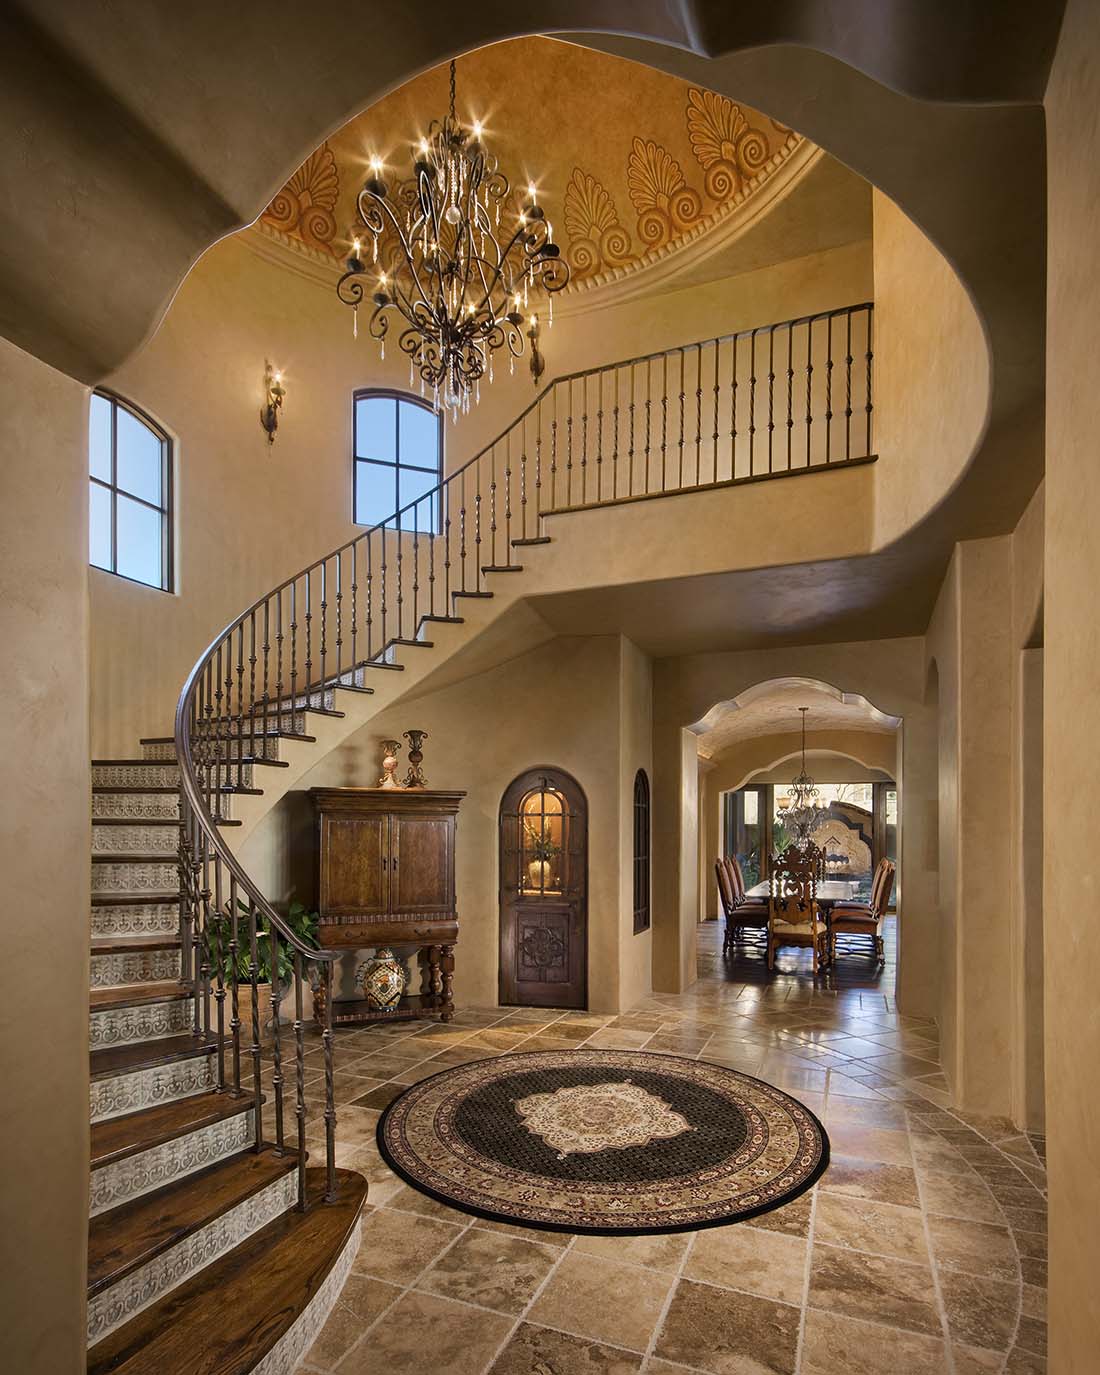 Spanish Colonial, Mirabel, Spiral Staircase, Dome